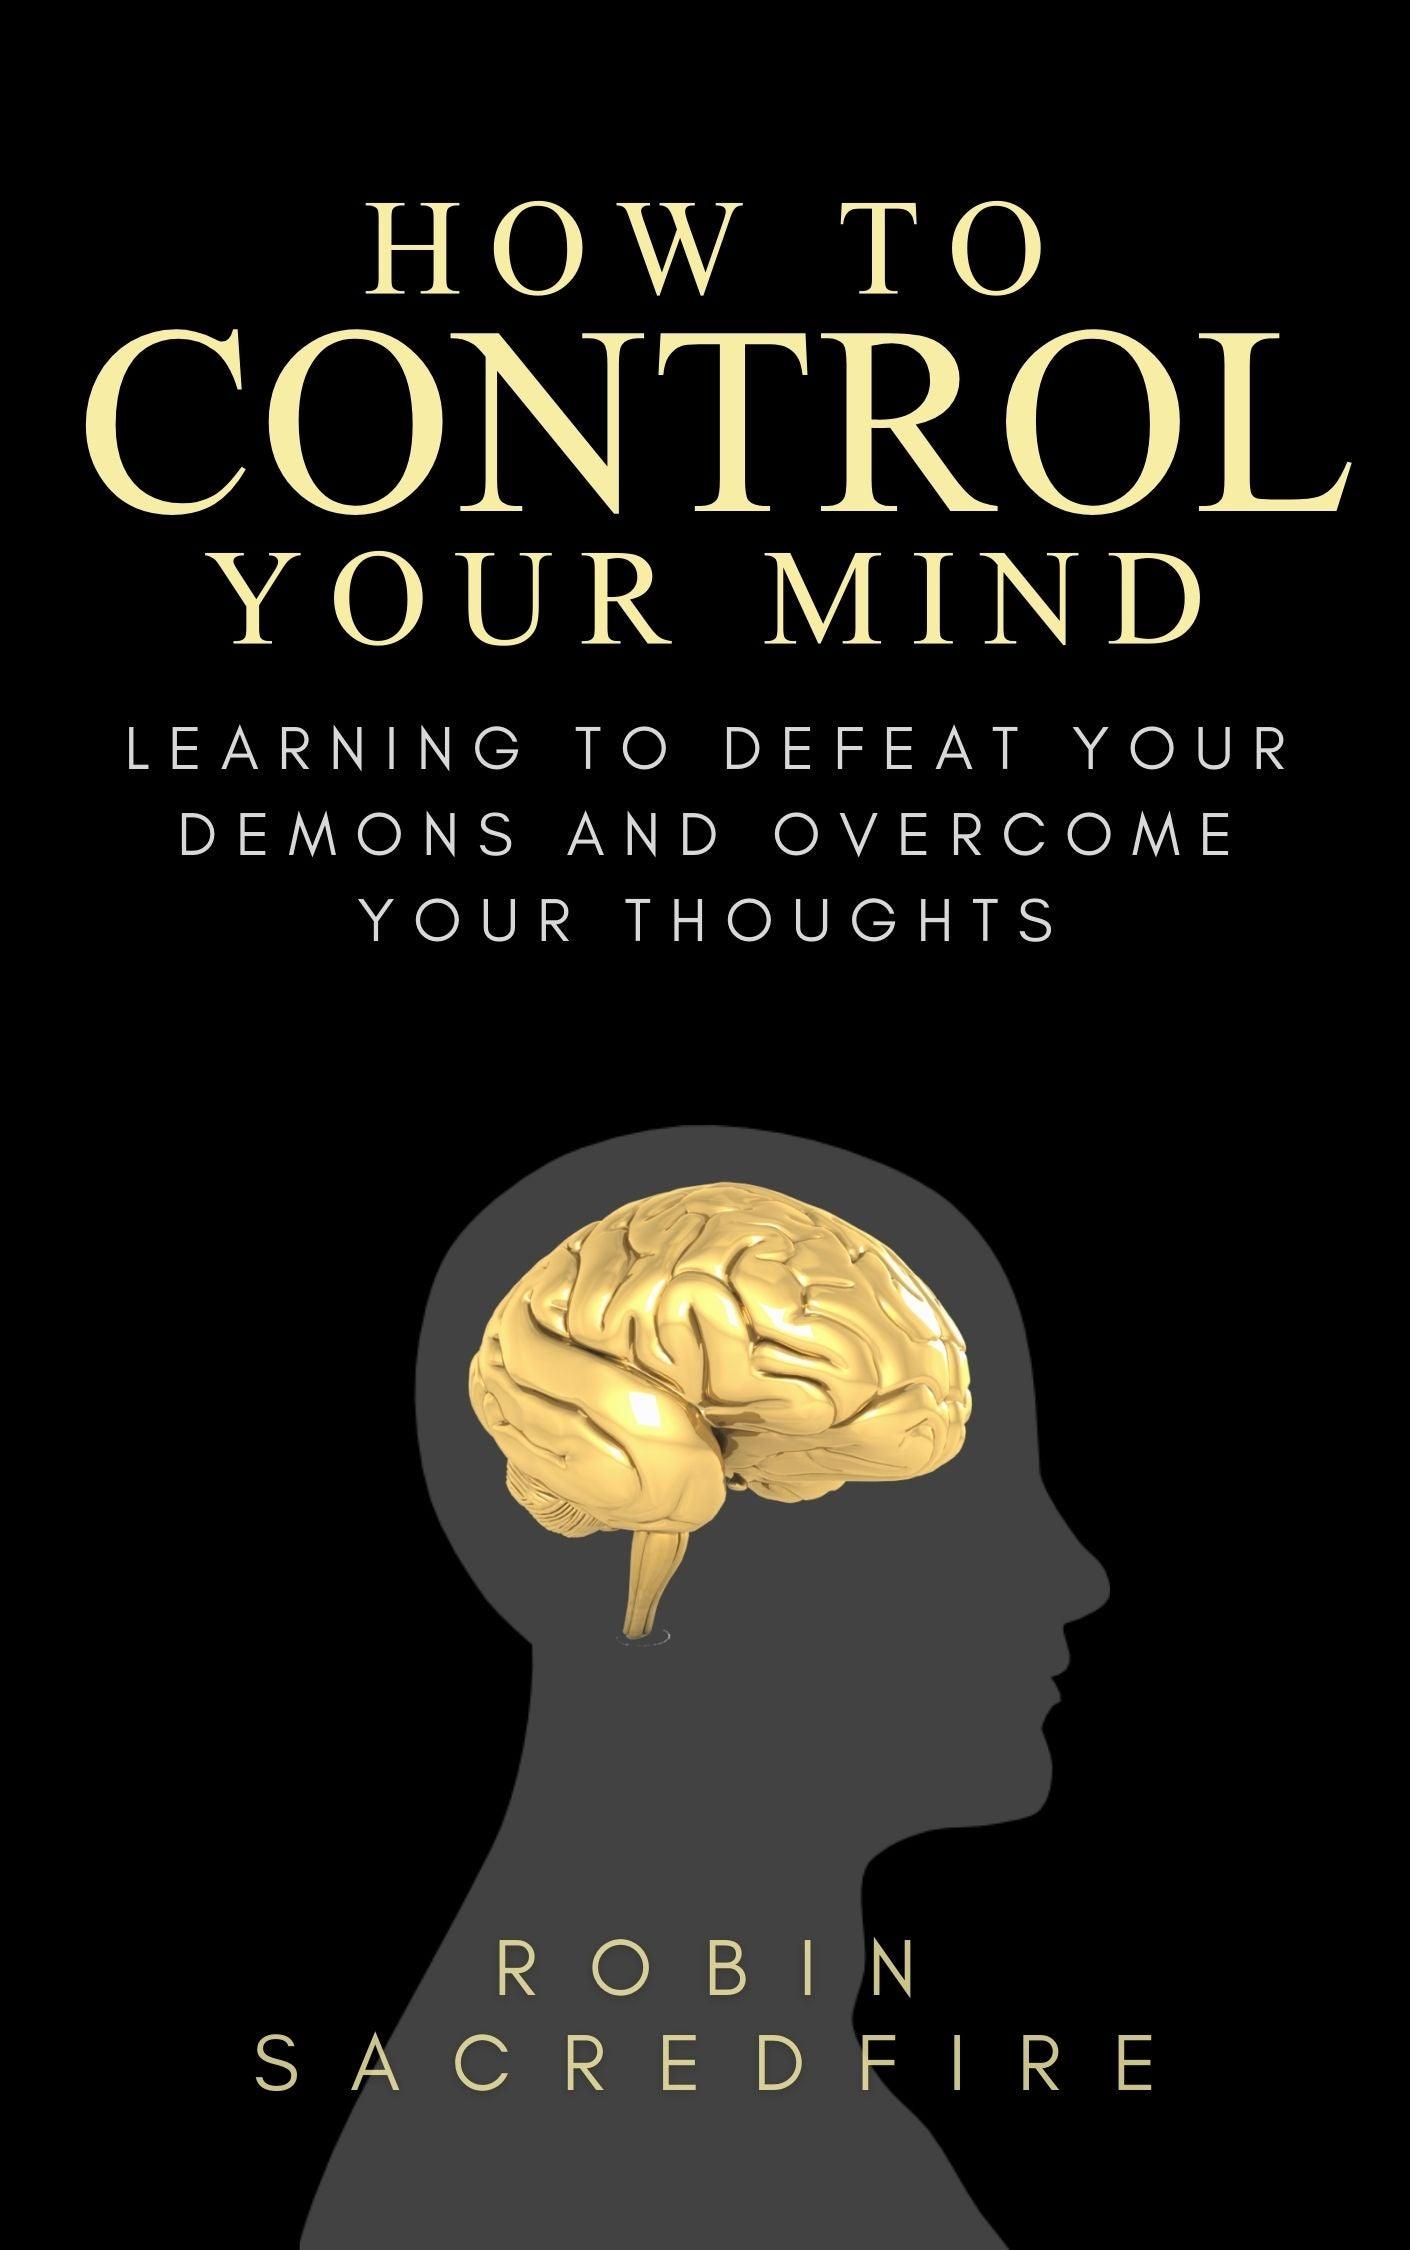 How to Control Your Mind - 22 Lions